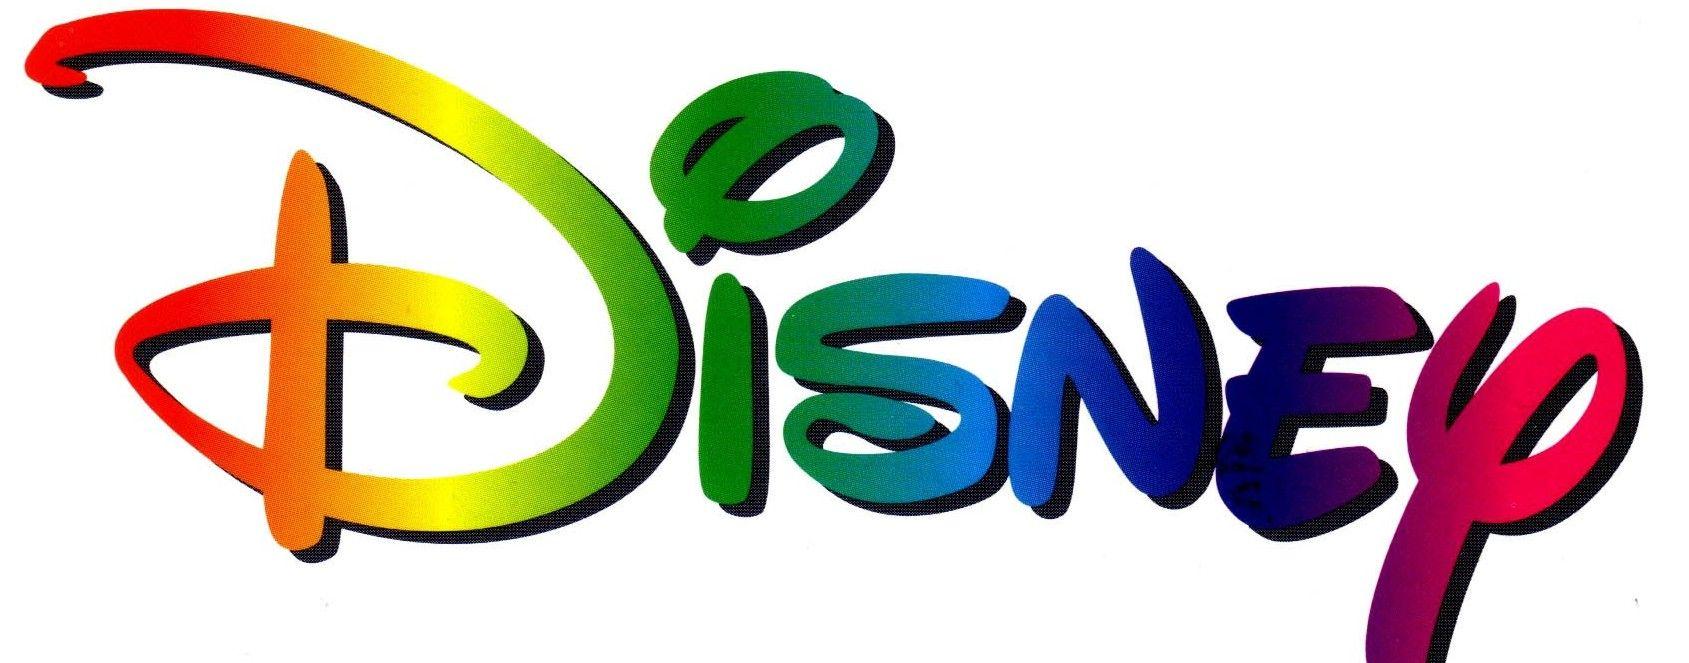 Disney Characters Logo - The Evolution of Disney Characters | RampageWired